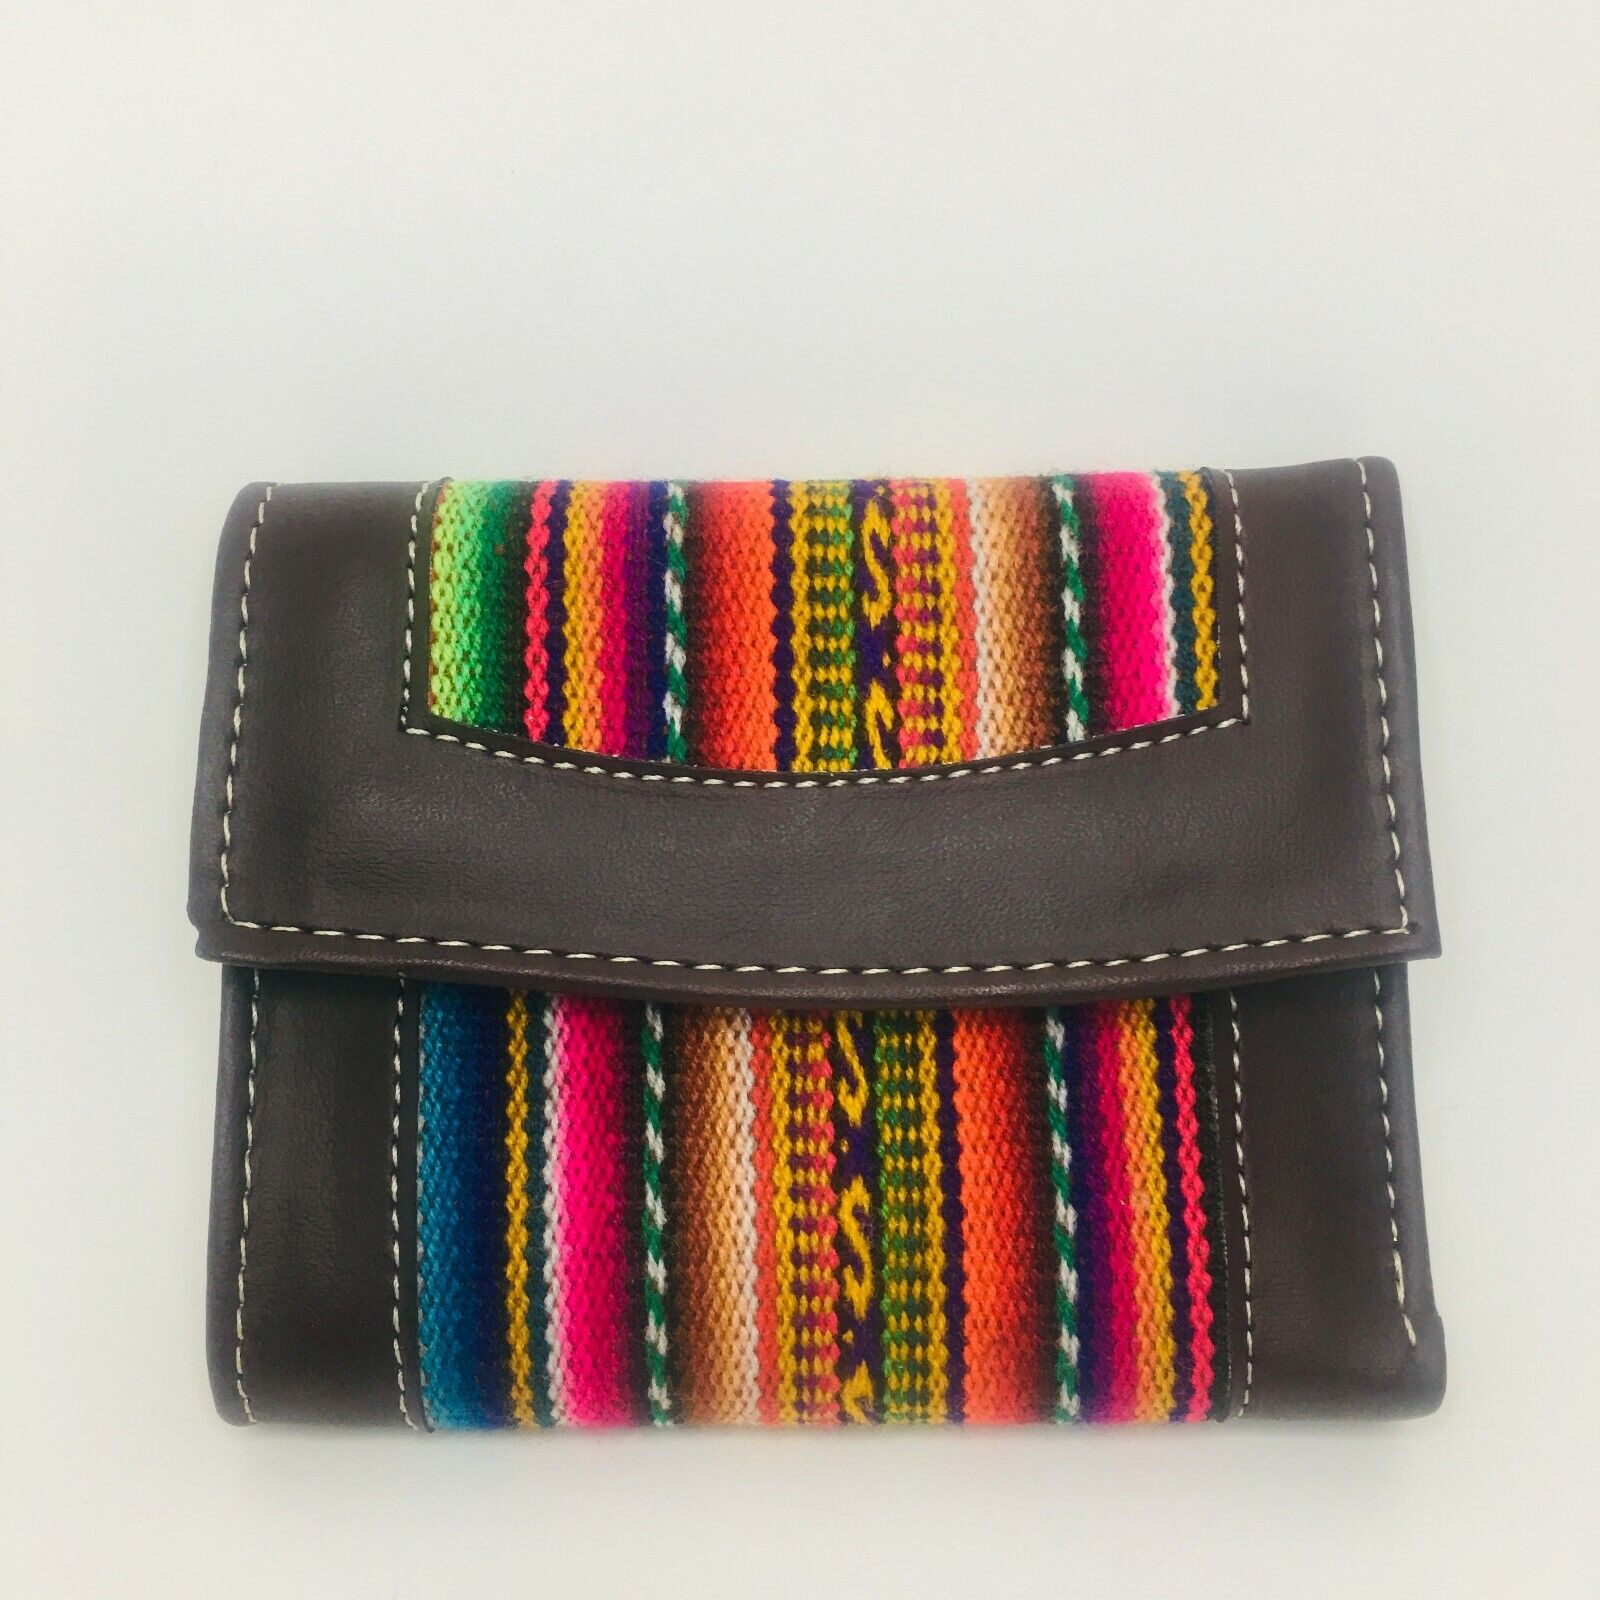 Handmade Peruvian Wallet With Woven Fabrics Ethnic Nice Leather Brown ...